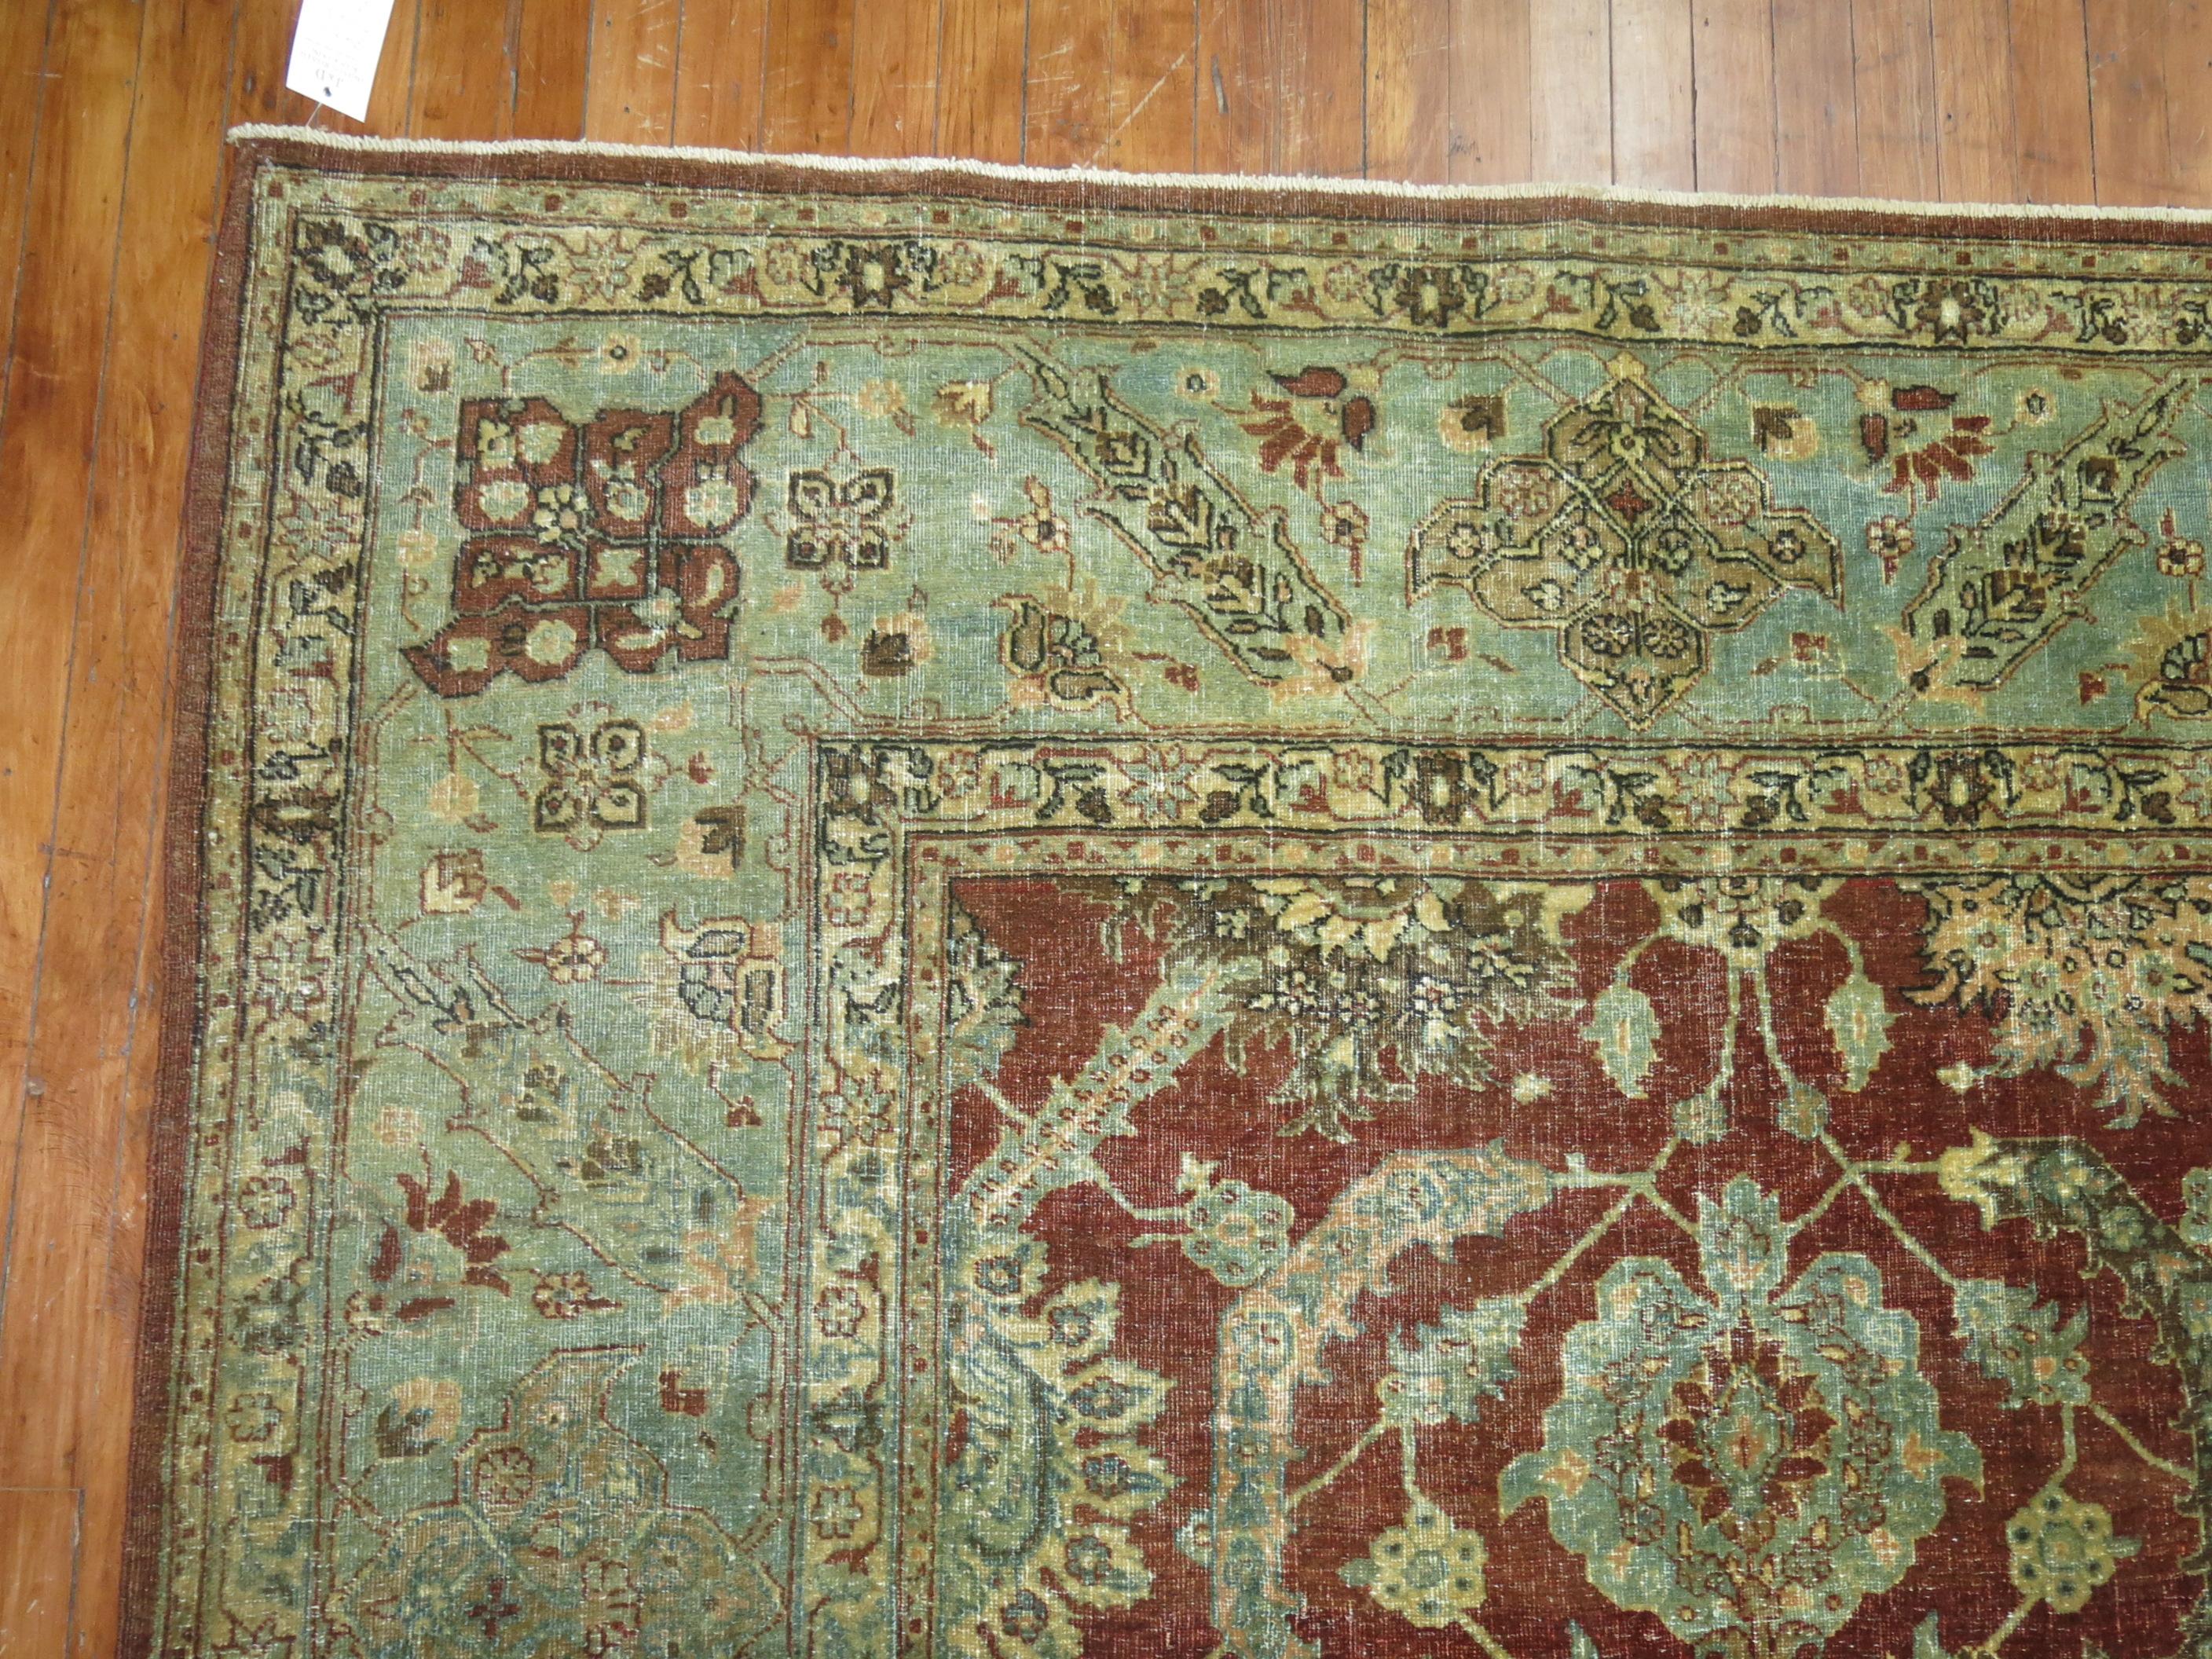 Crimson Antique Persian Tabriz Room Size Rug In Fair Condition For Sale In New York, NY